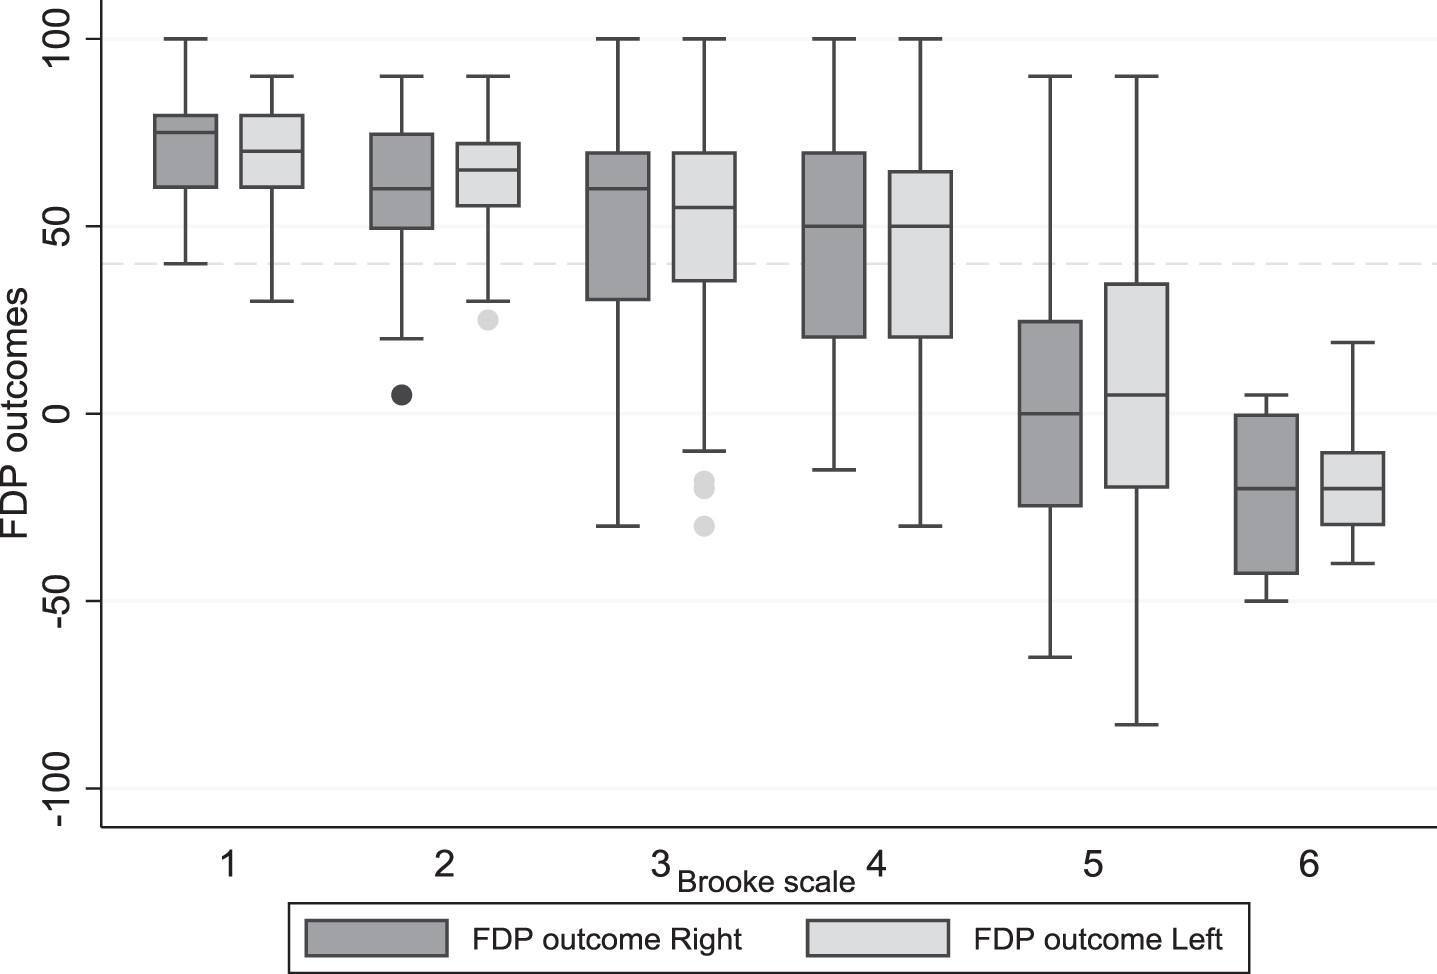 Boxplot of all longitudinal data of the FDP outcome left and right in the different Brooke scores (people who were not able to extend their fingers excluded). Note: all longitudinal measurements are included, for this reason, a person may be represented in multiple boxplots as they may have changed from one disease stage to the next during the course of the study.